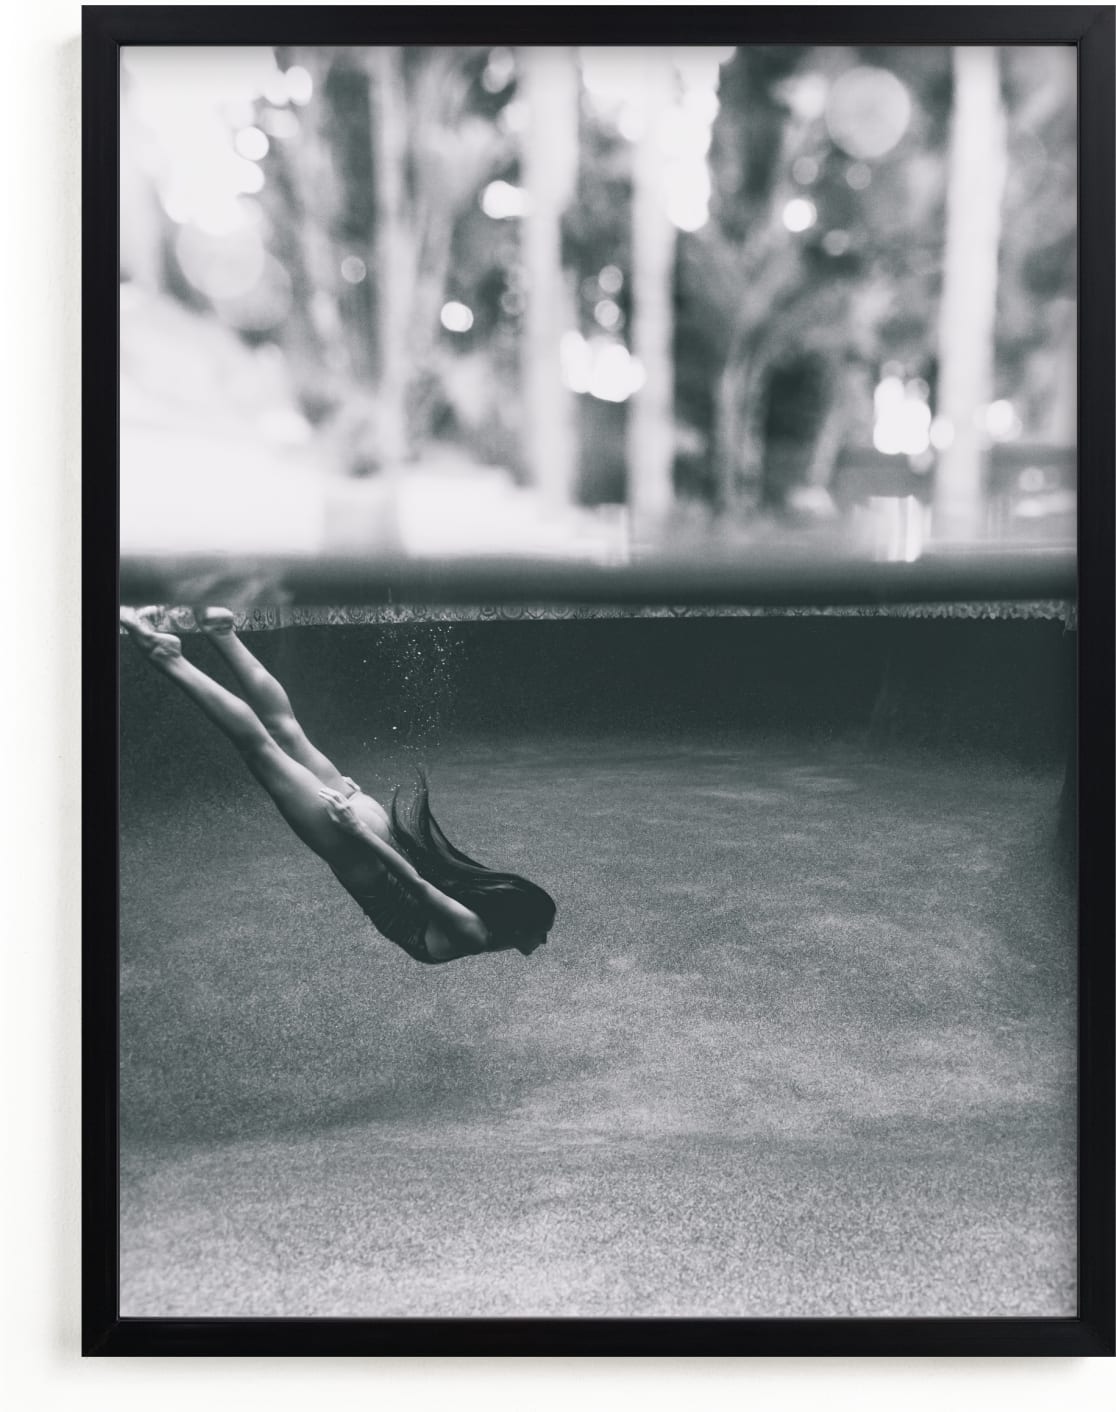 This is a black and white art by Zemina Zaferakis called Submerged.